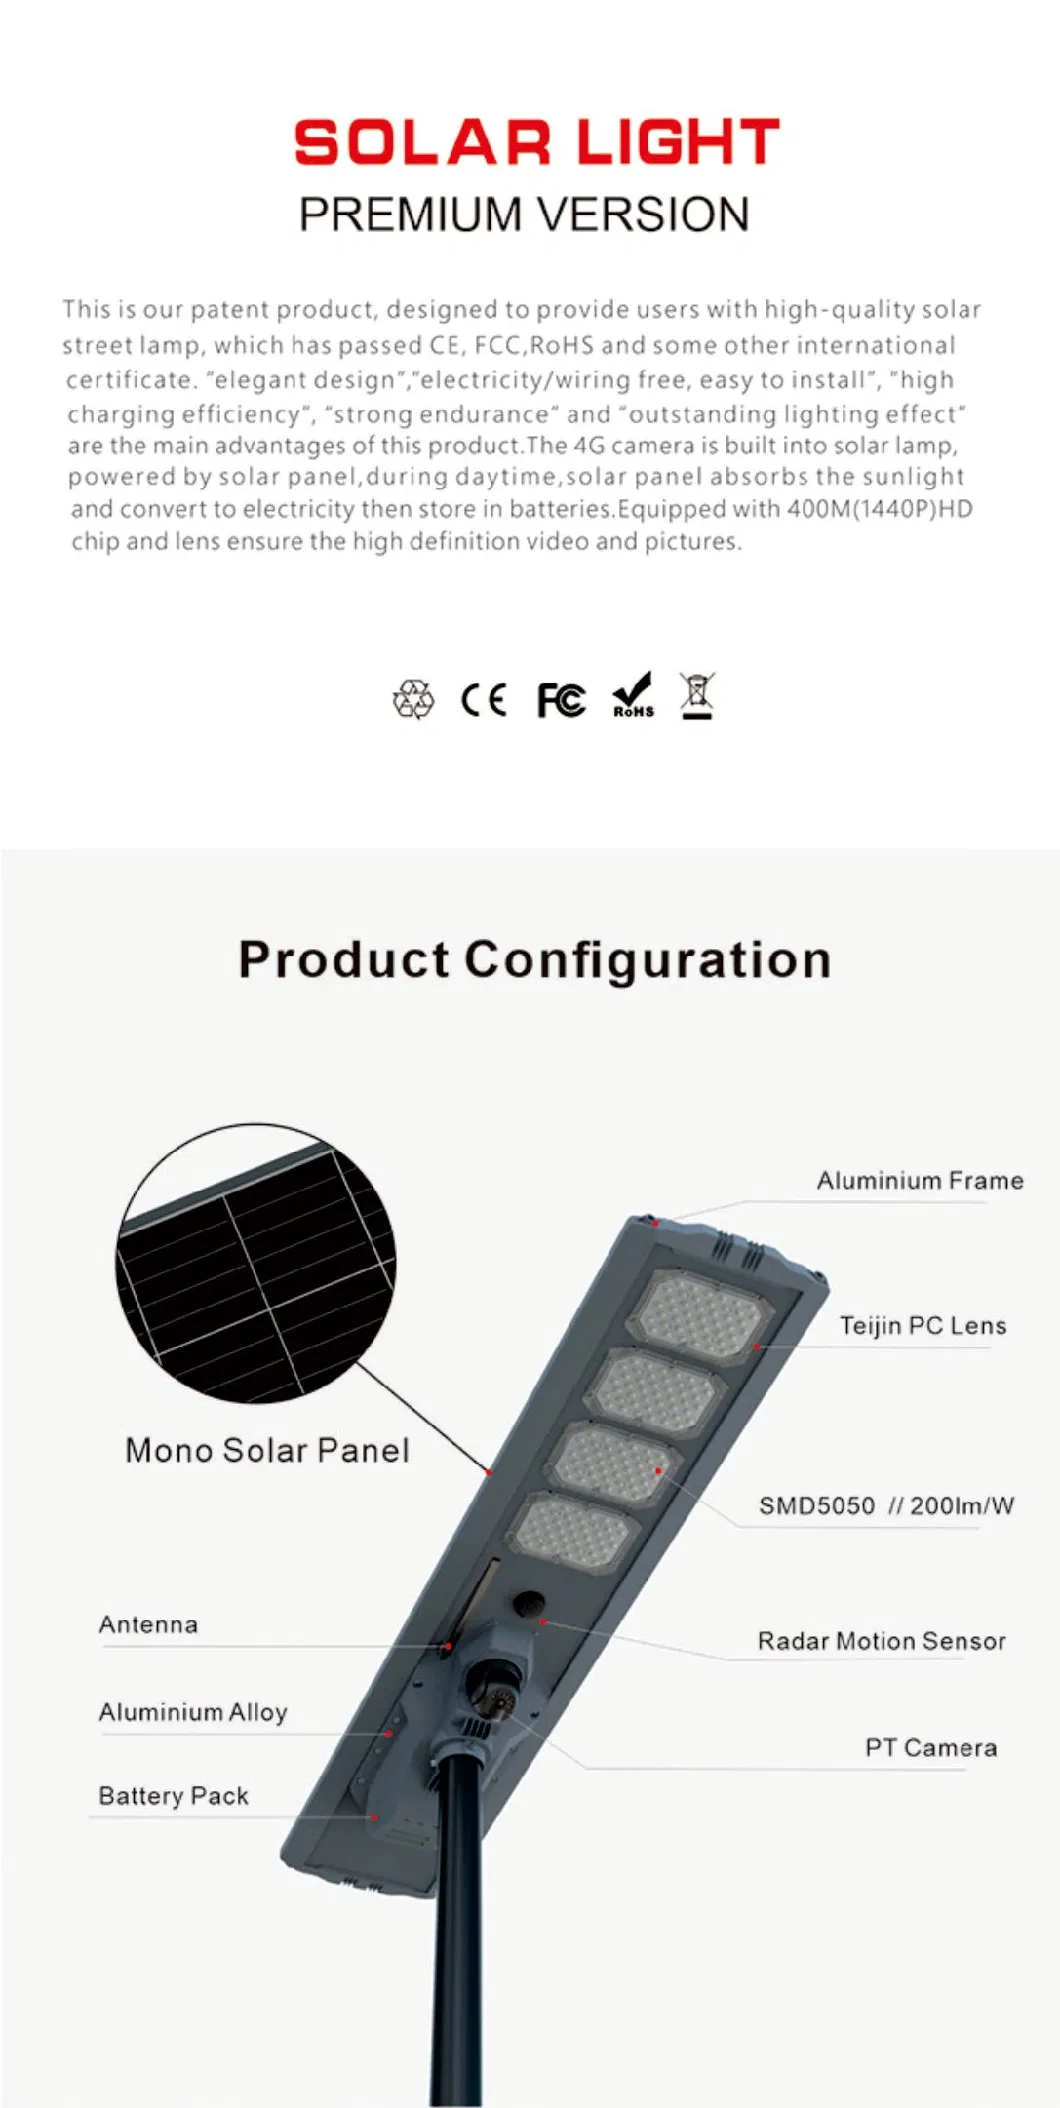 Distributor Wholesale Factory Price Outdoor LED Motion Sensor Security Solar Flood Light for House Wall or Pole with CCTV 4G or WiFi